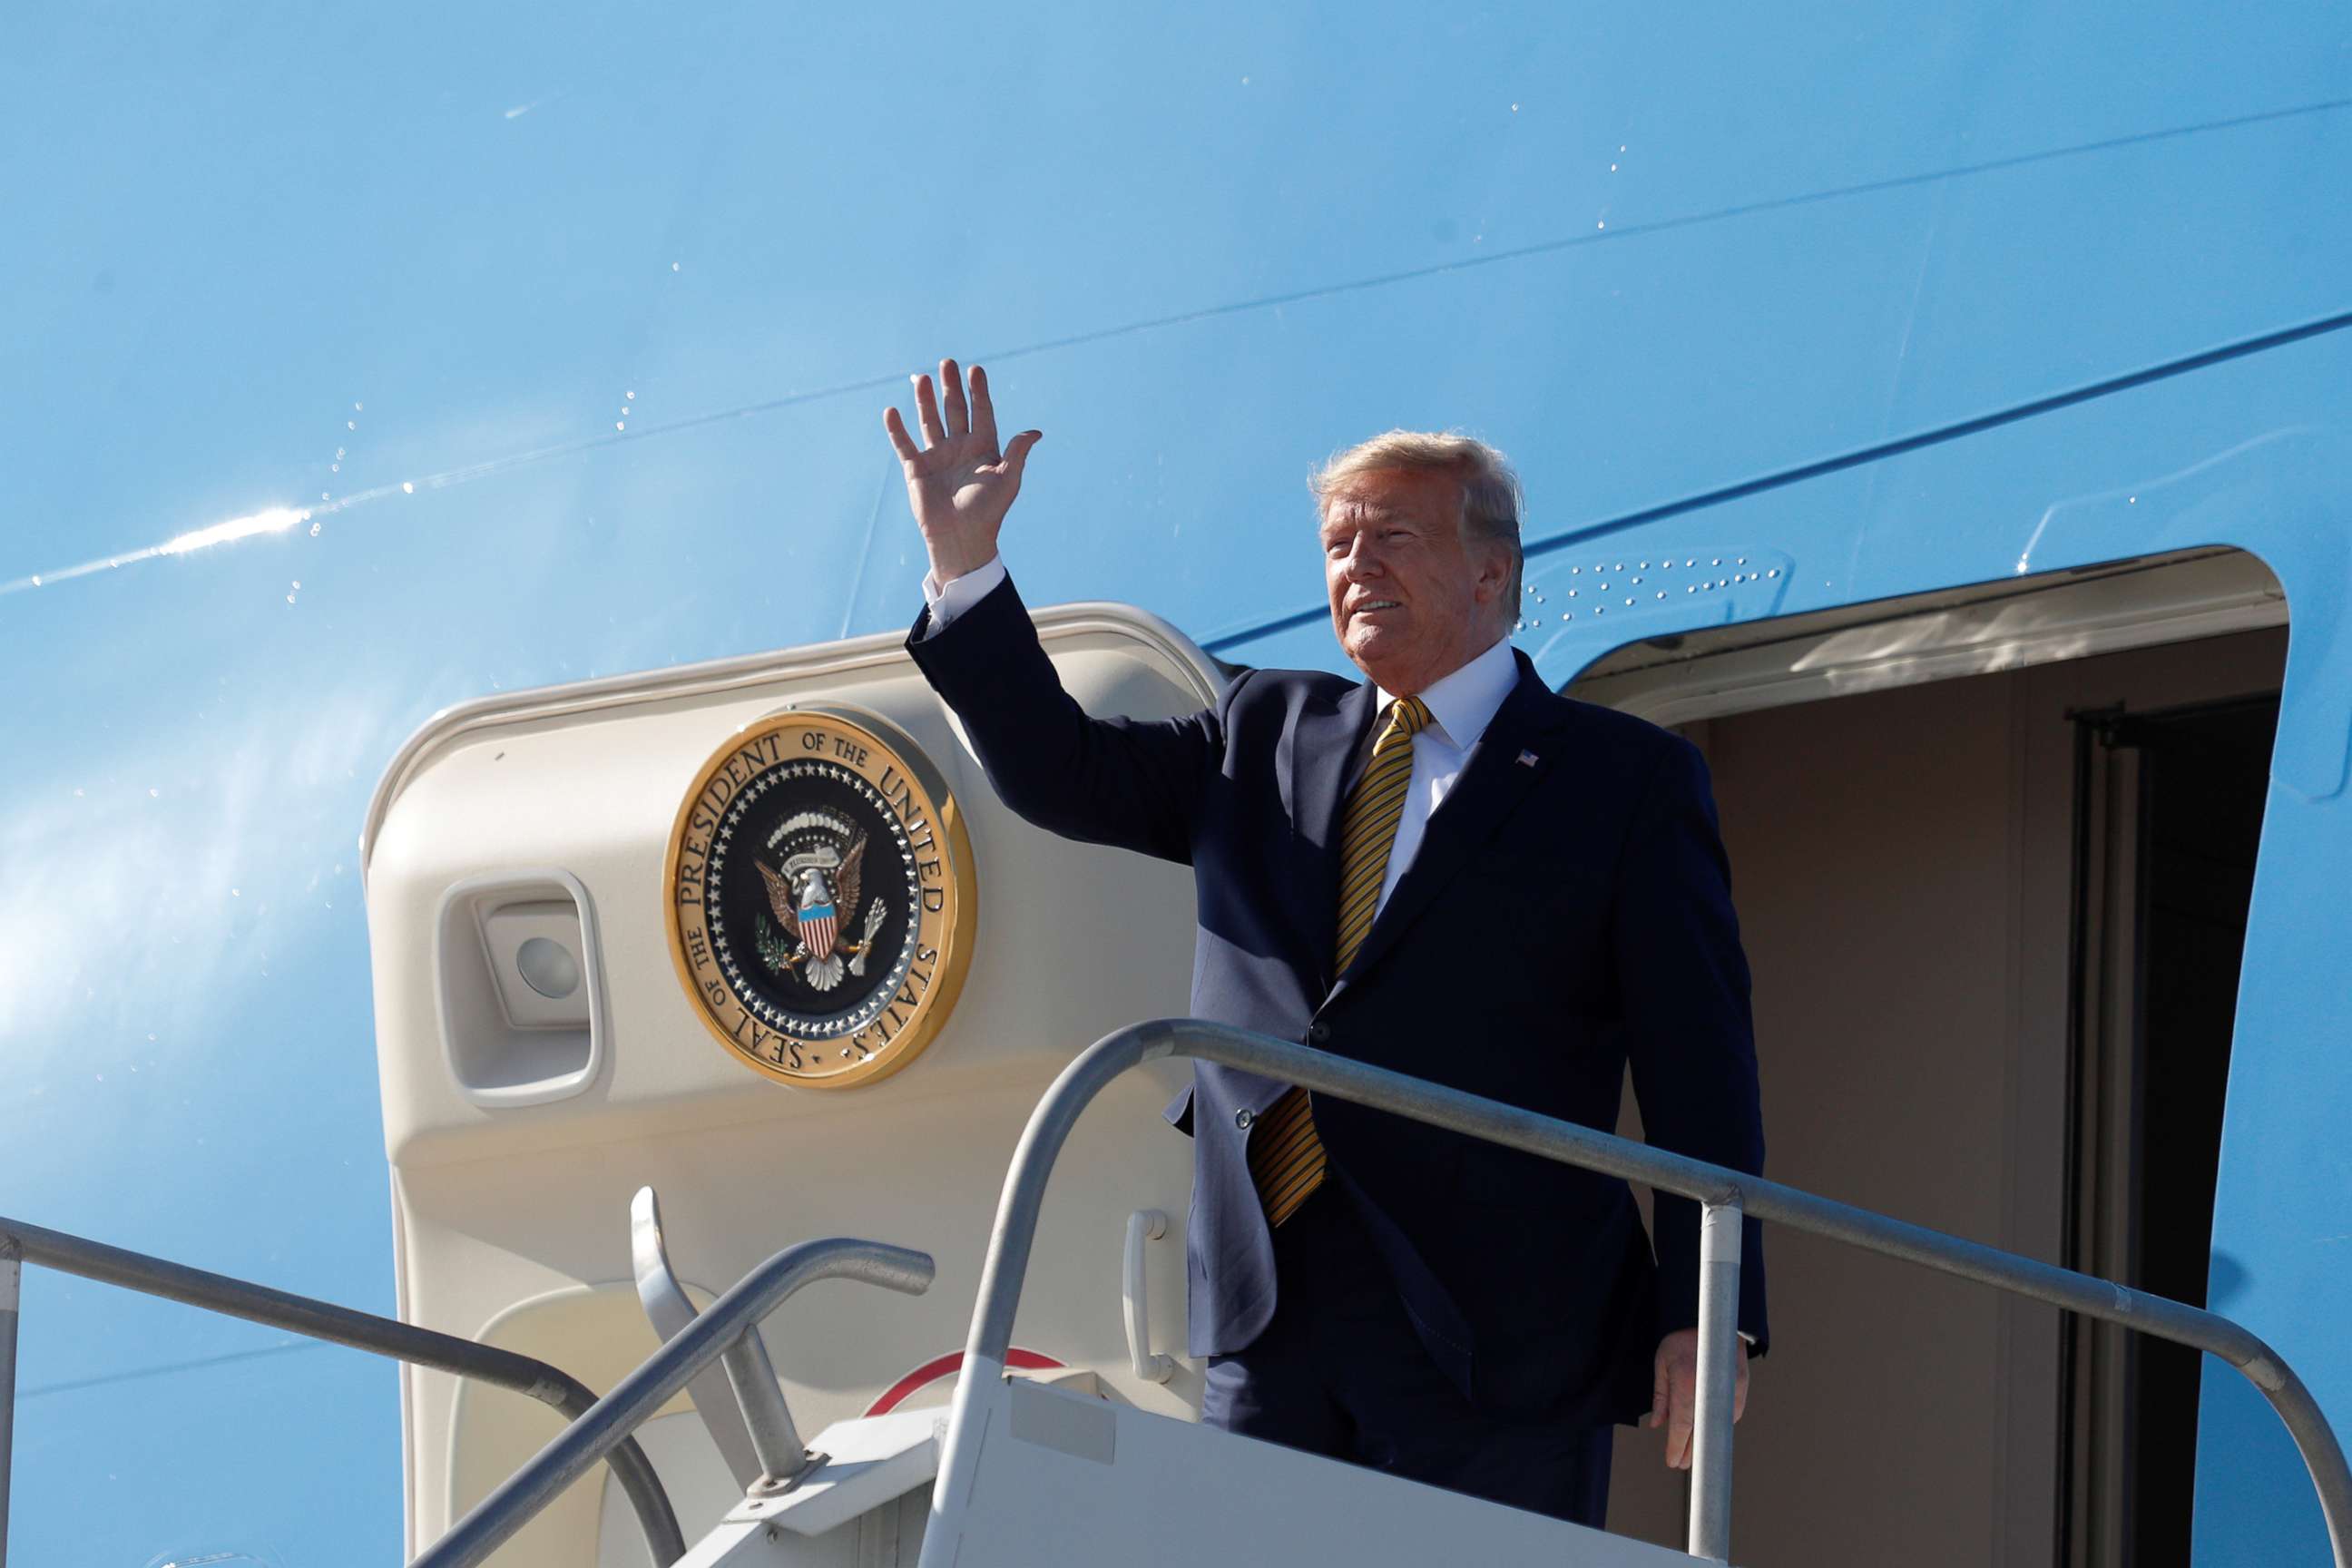 PHOTO: President Donald Trump disembarks from Air Force One at Los Angeles International Airport in Los Angeles, September 17, 2019.